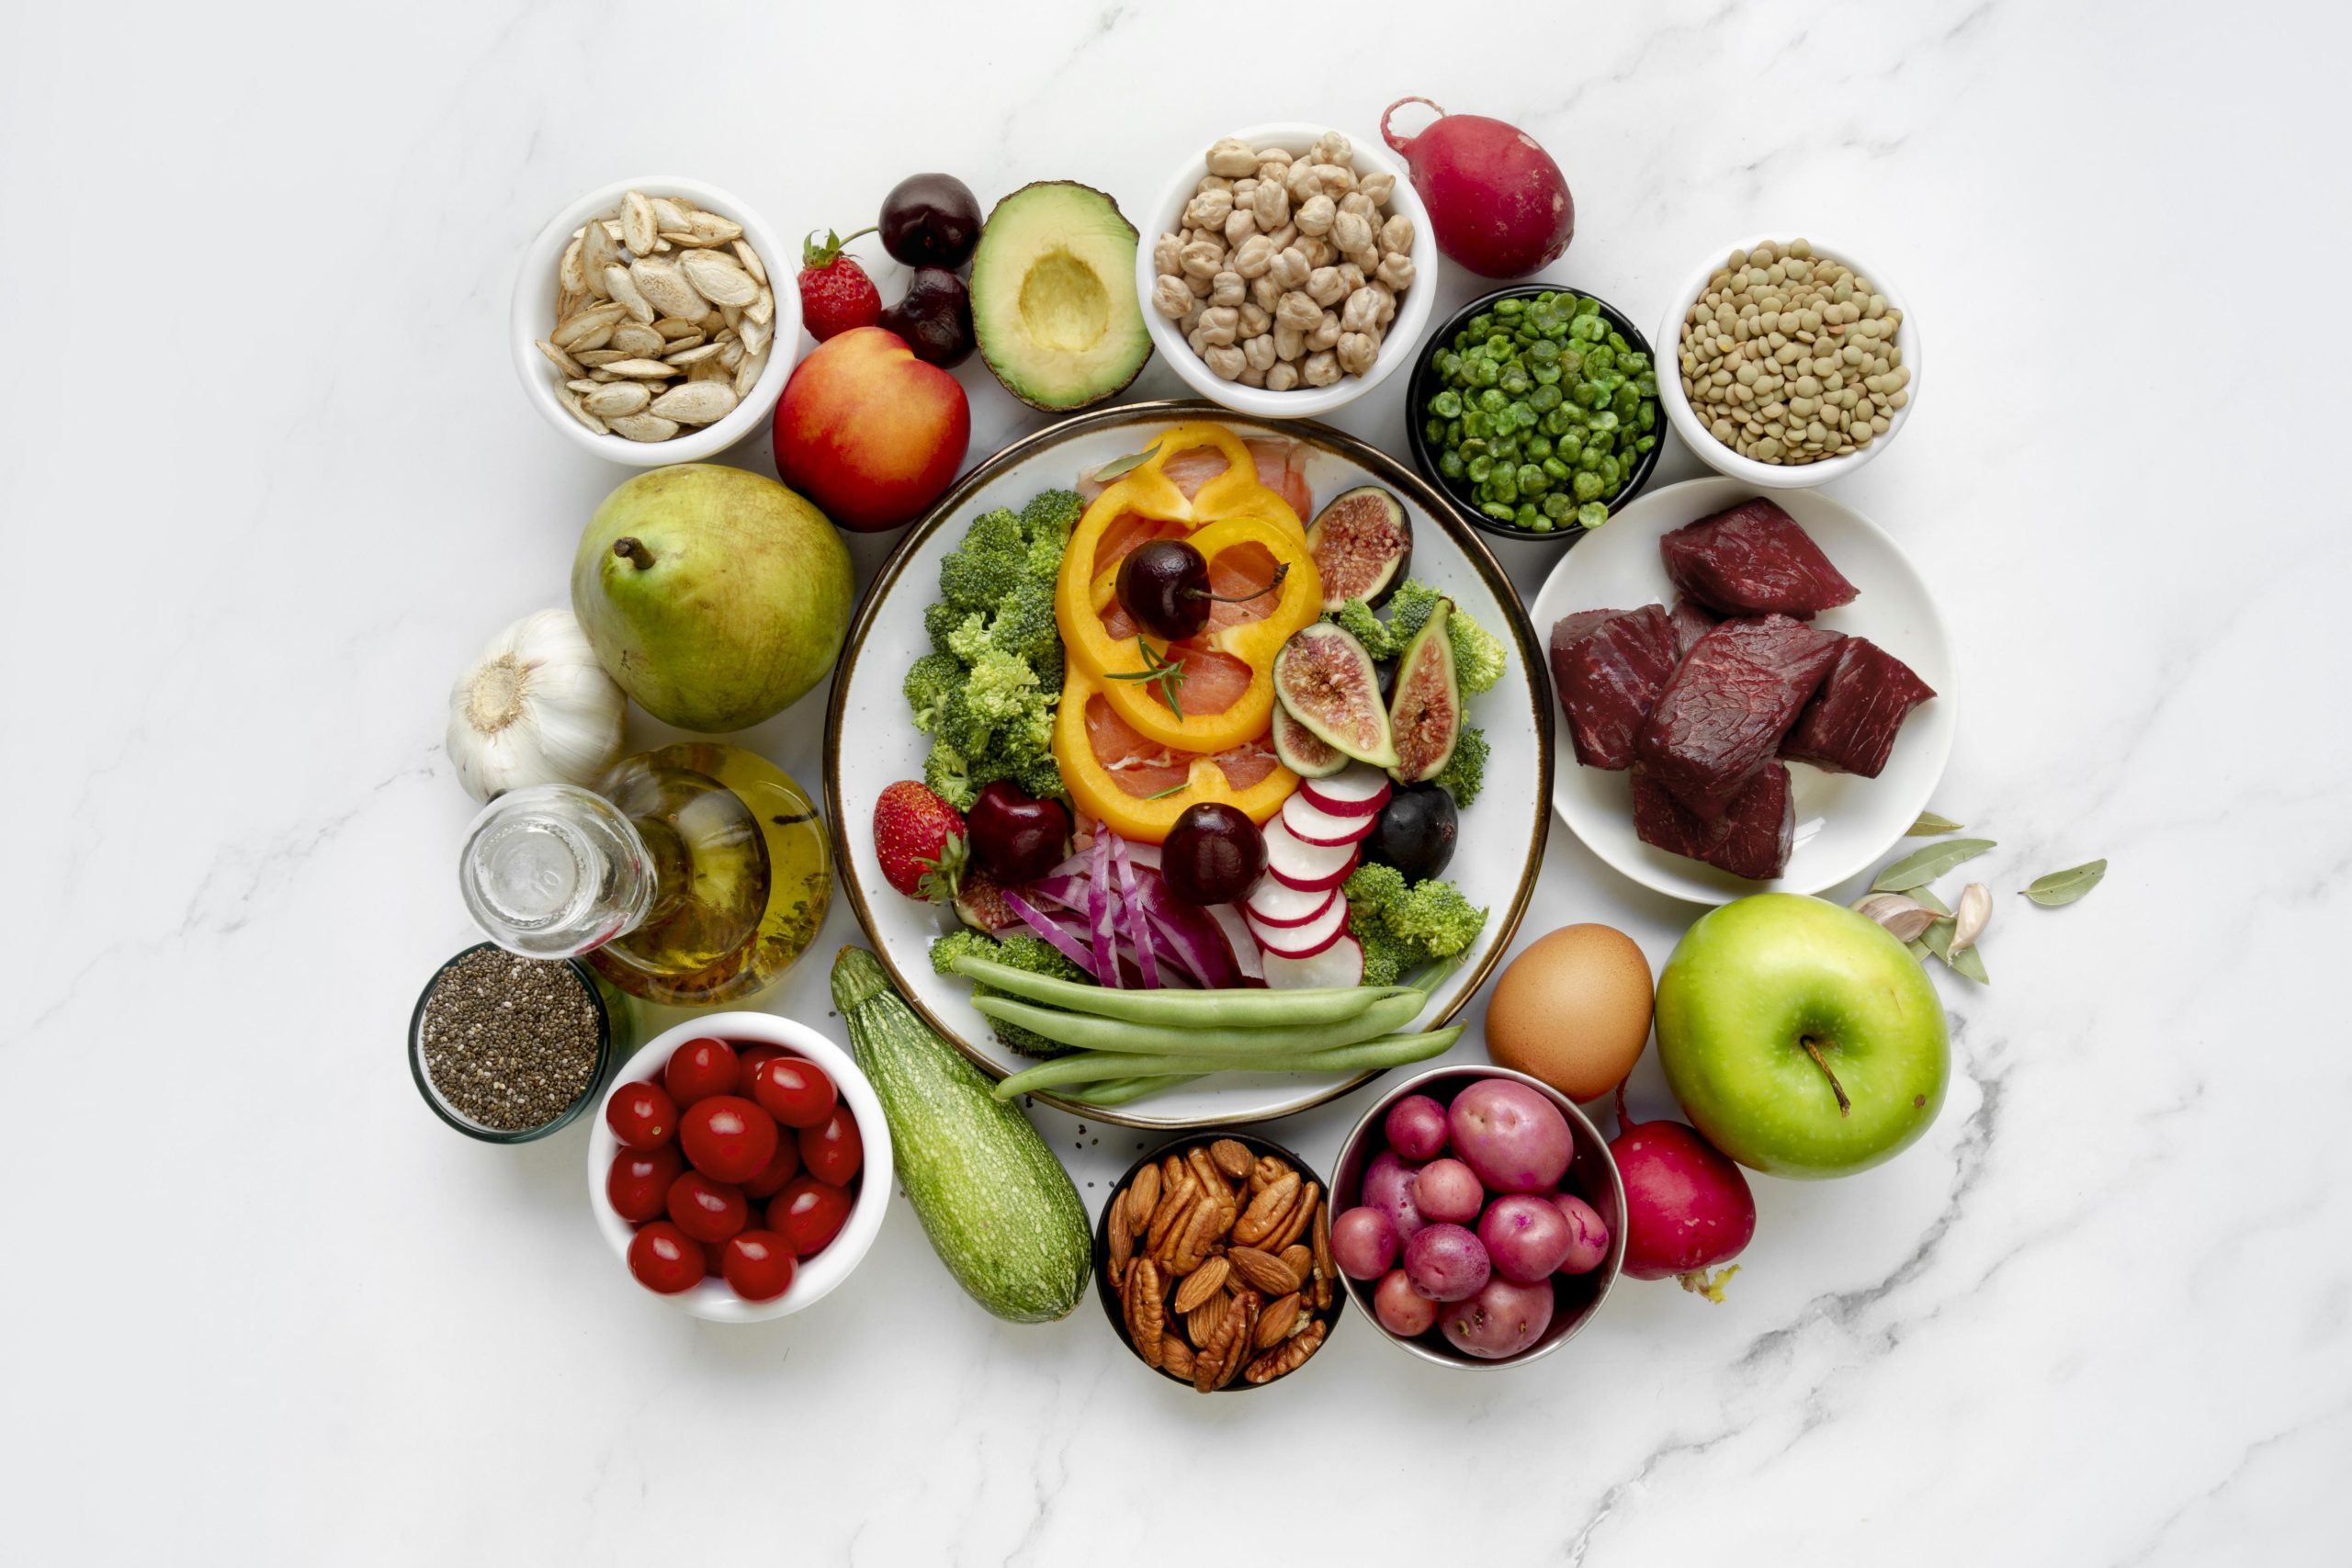 A balanced meal, with fruits, vegetables, nuts, and pulses.